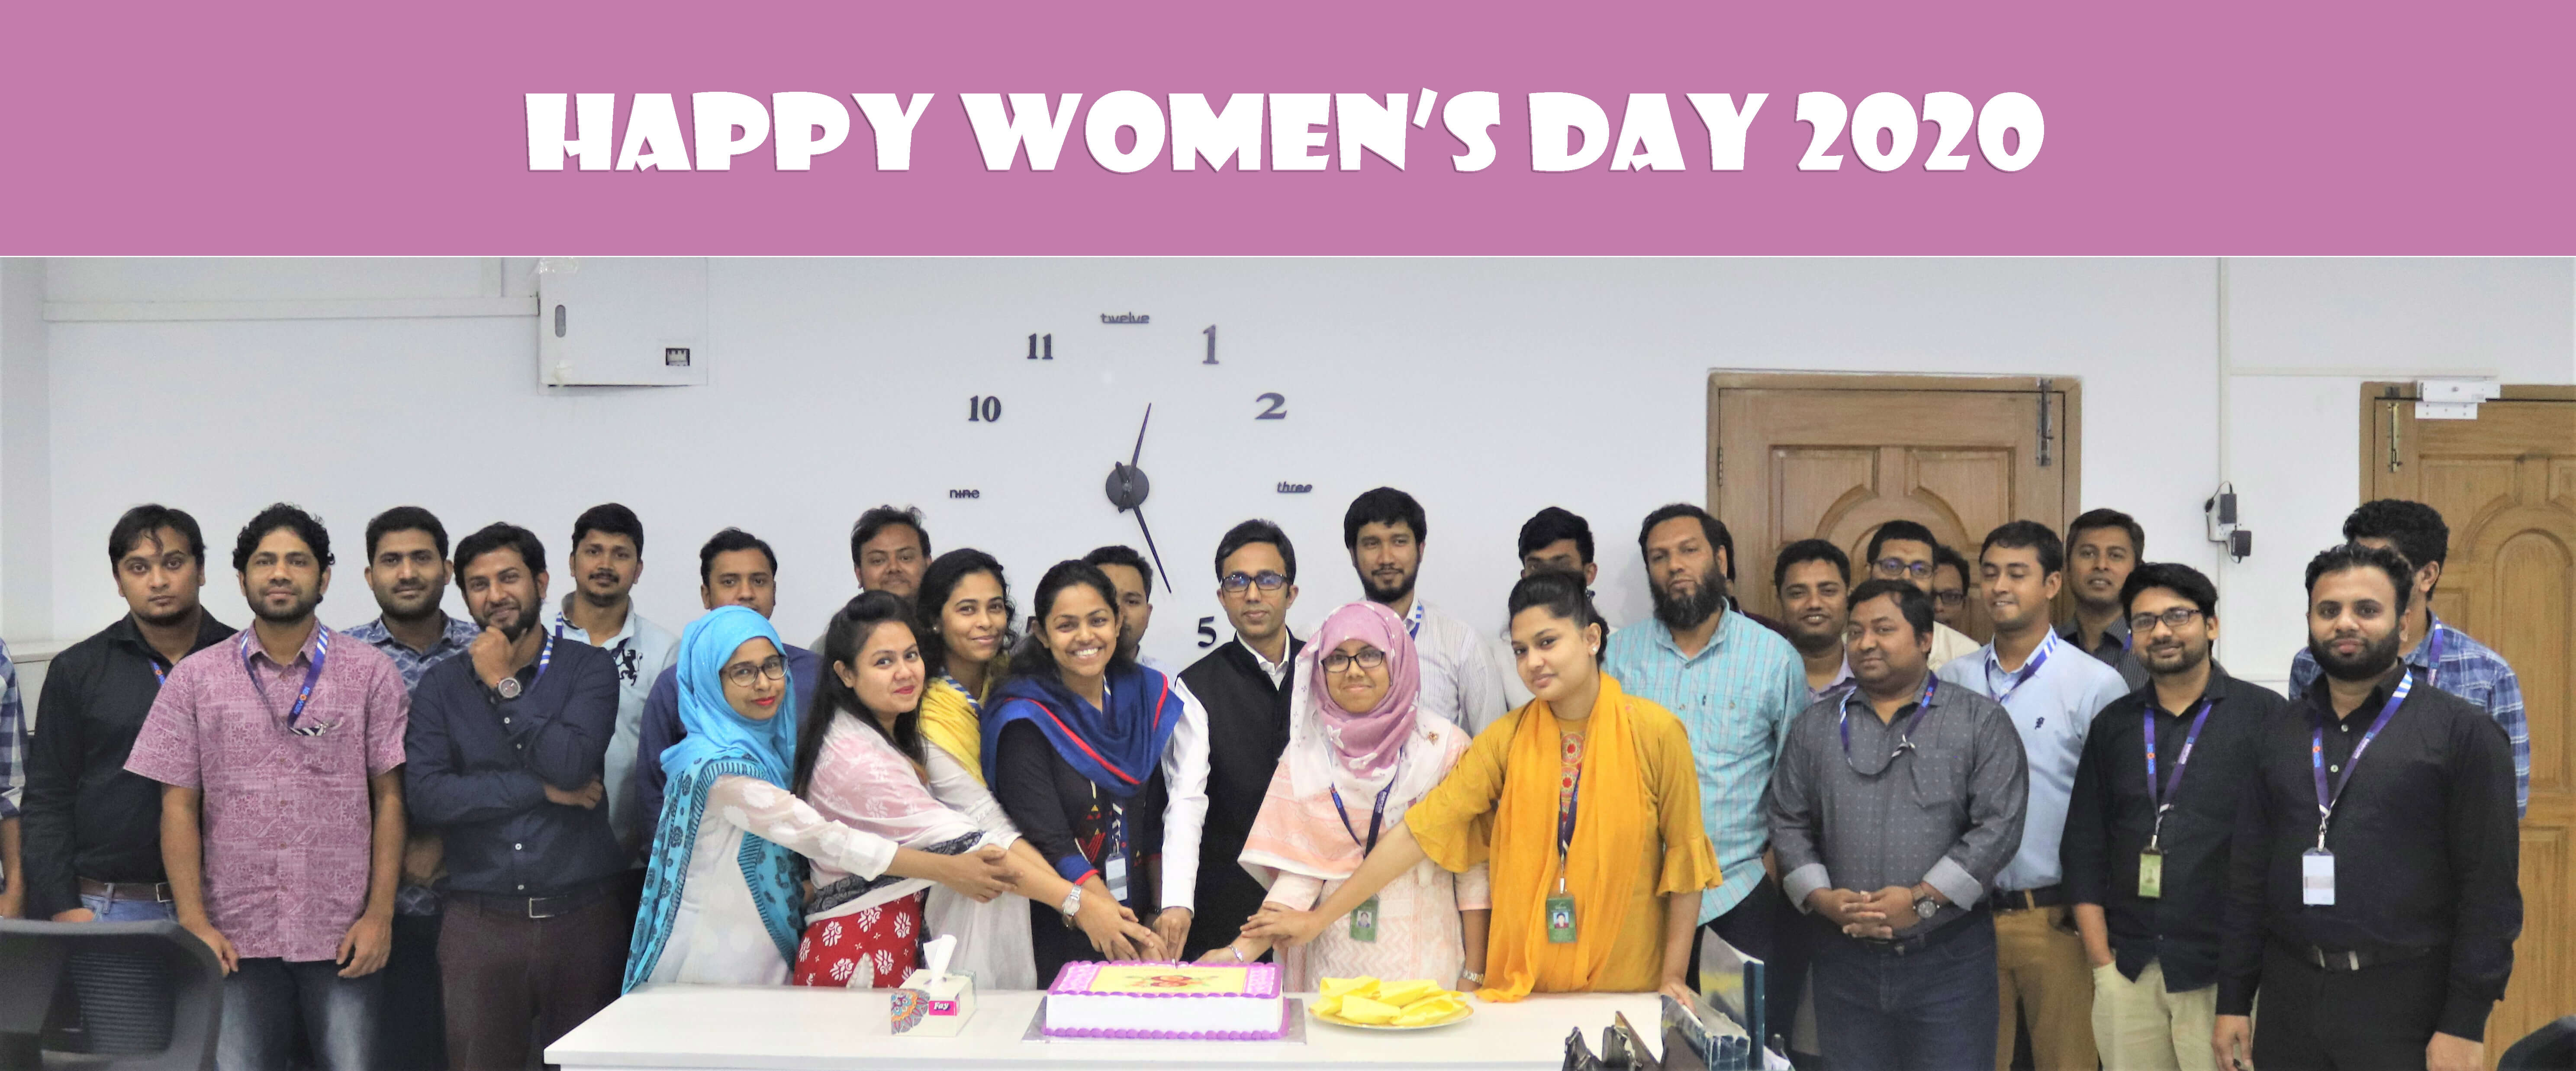 International Women's Day celebration at our office | Babylon Resources  Limited